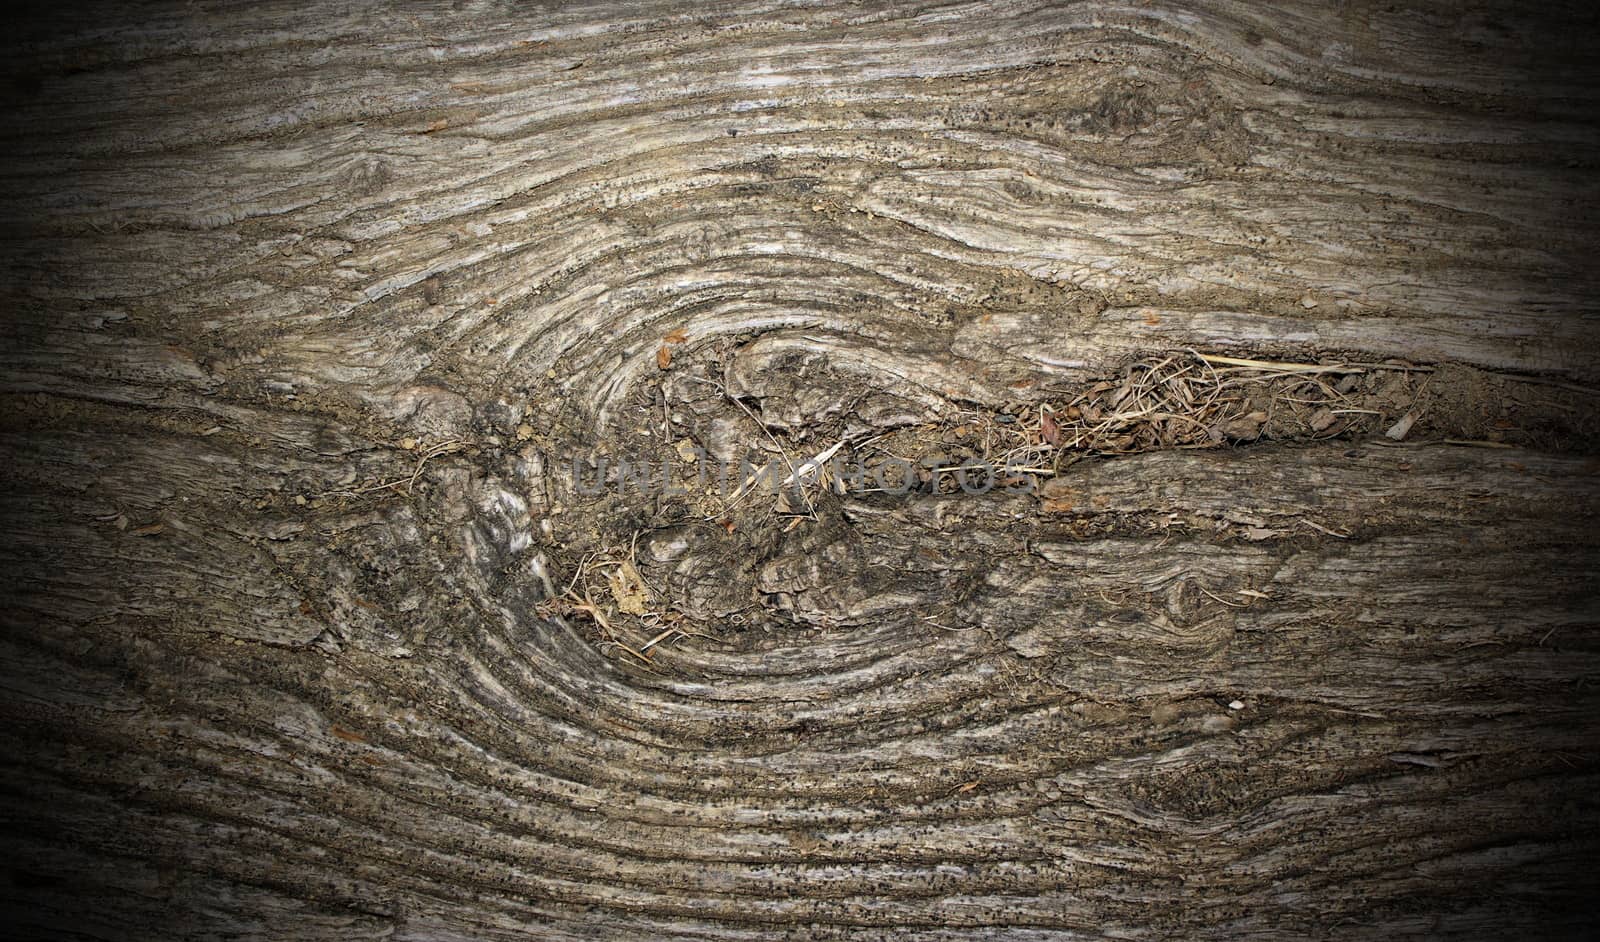 ancient poplar wood texture with knot and lots of debris got there in more than two hundred years